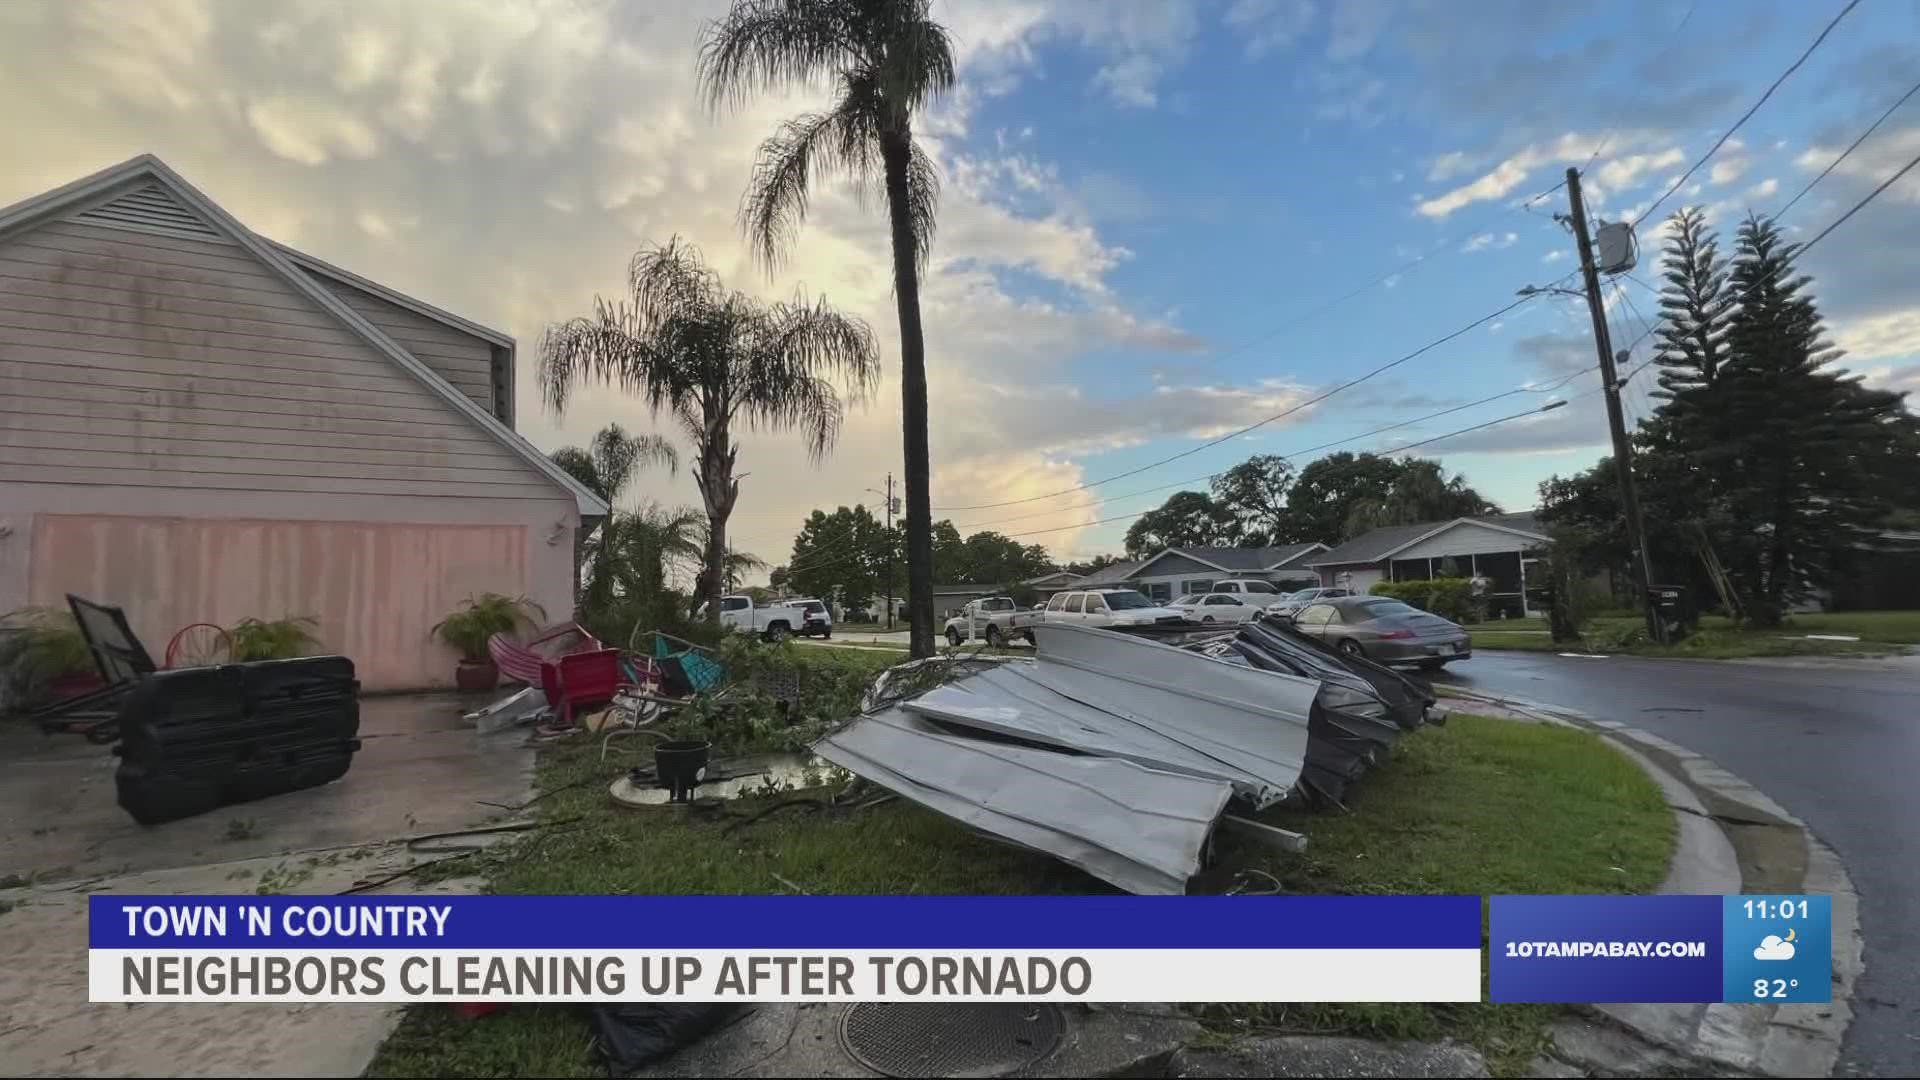 The National Weather Service has confirmed two "brief, weak" tornados in the areas of Trinity and Town 'N Country.